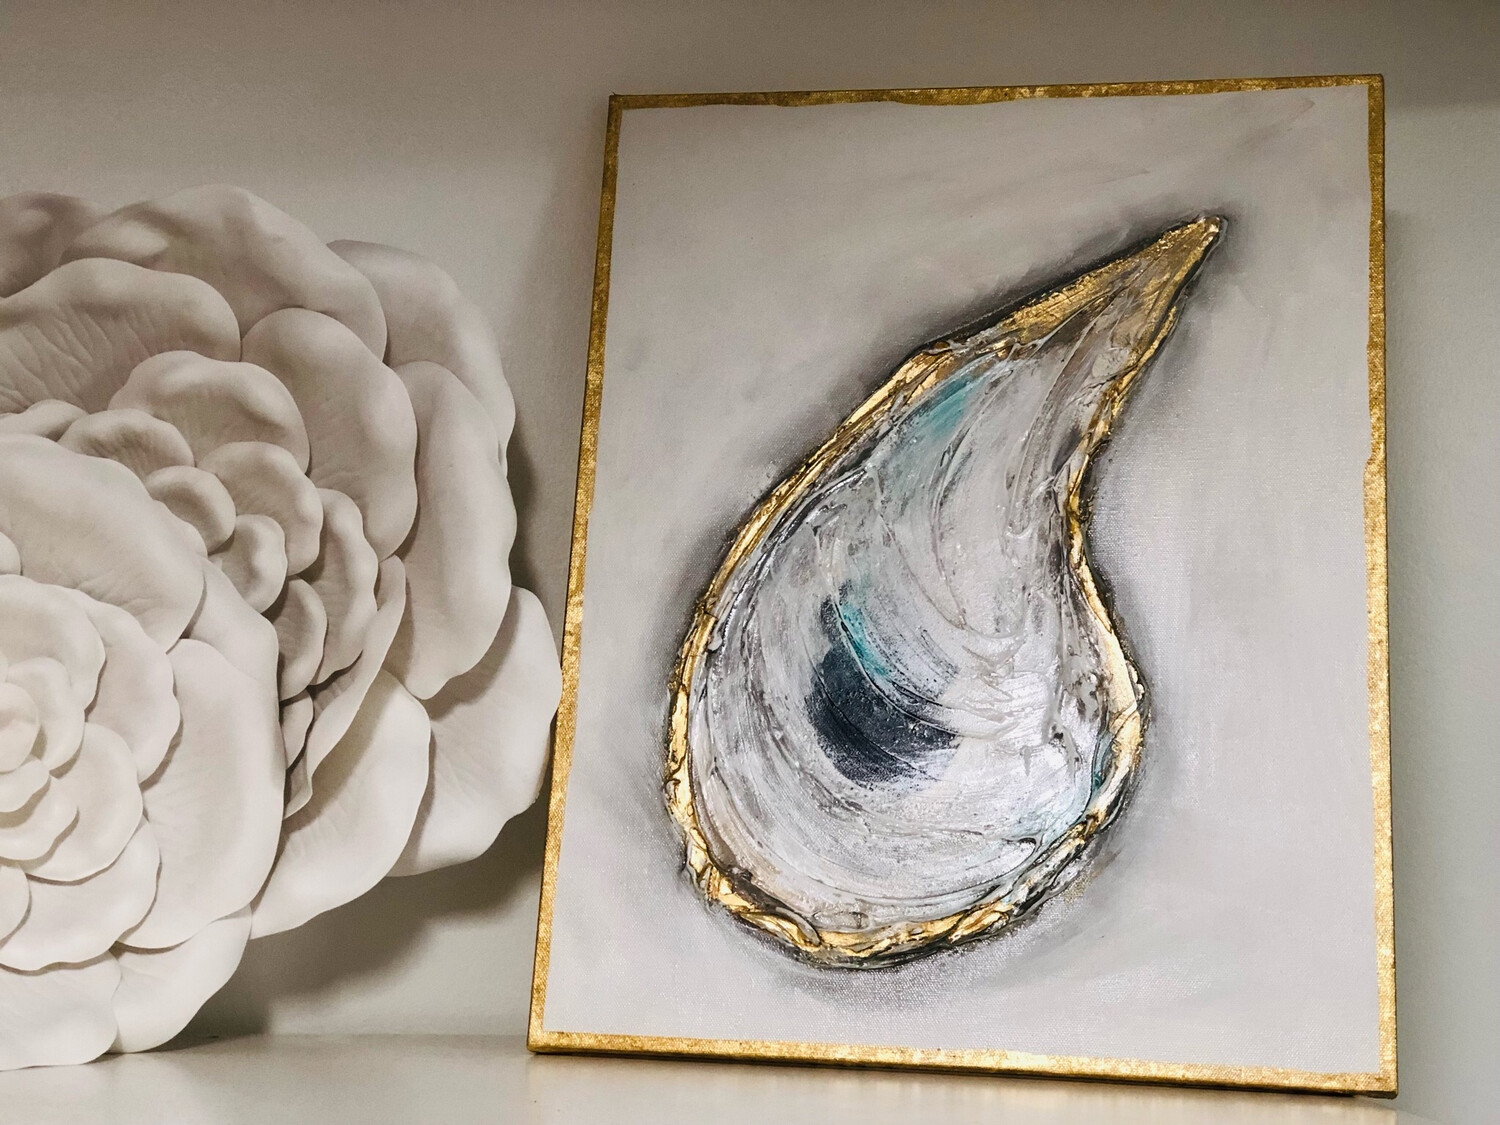 Nella Original Painting 16x20 "Oyster Love" Gold Edge Blue